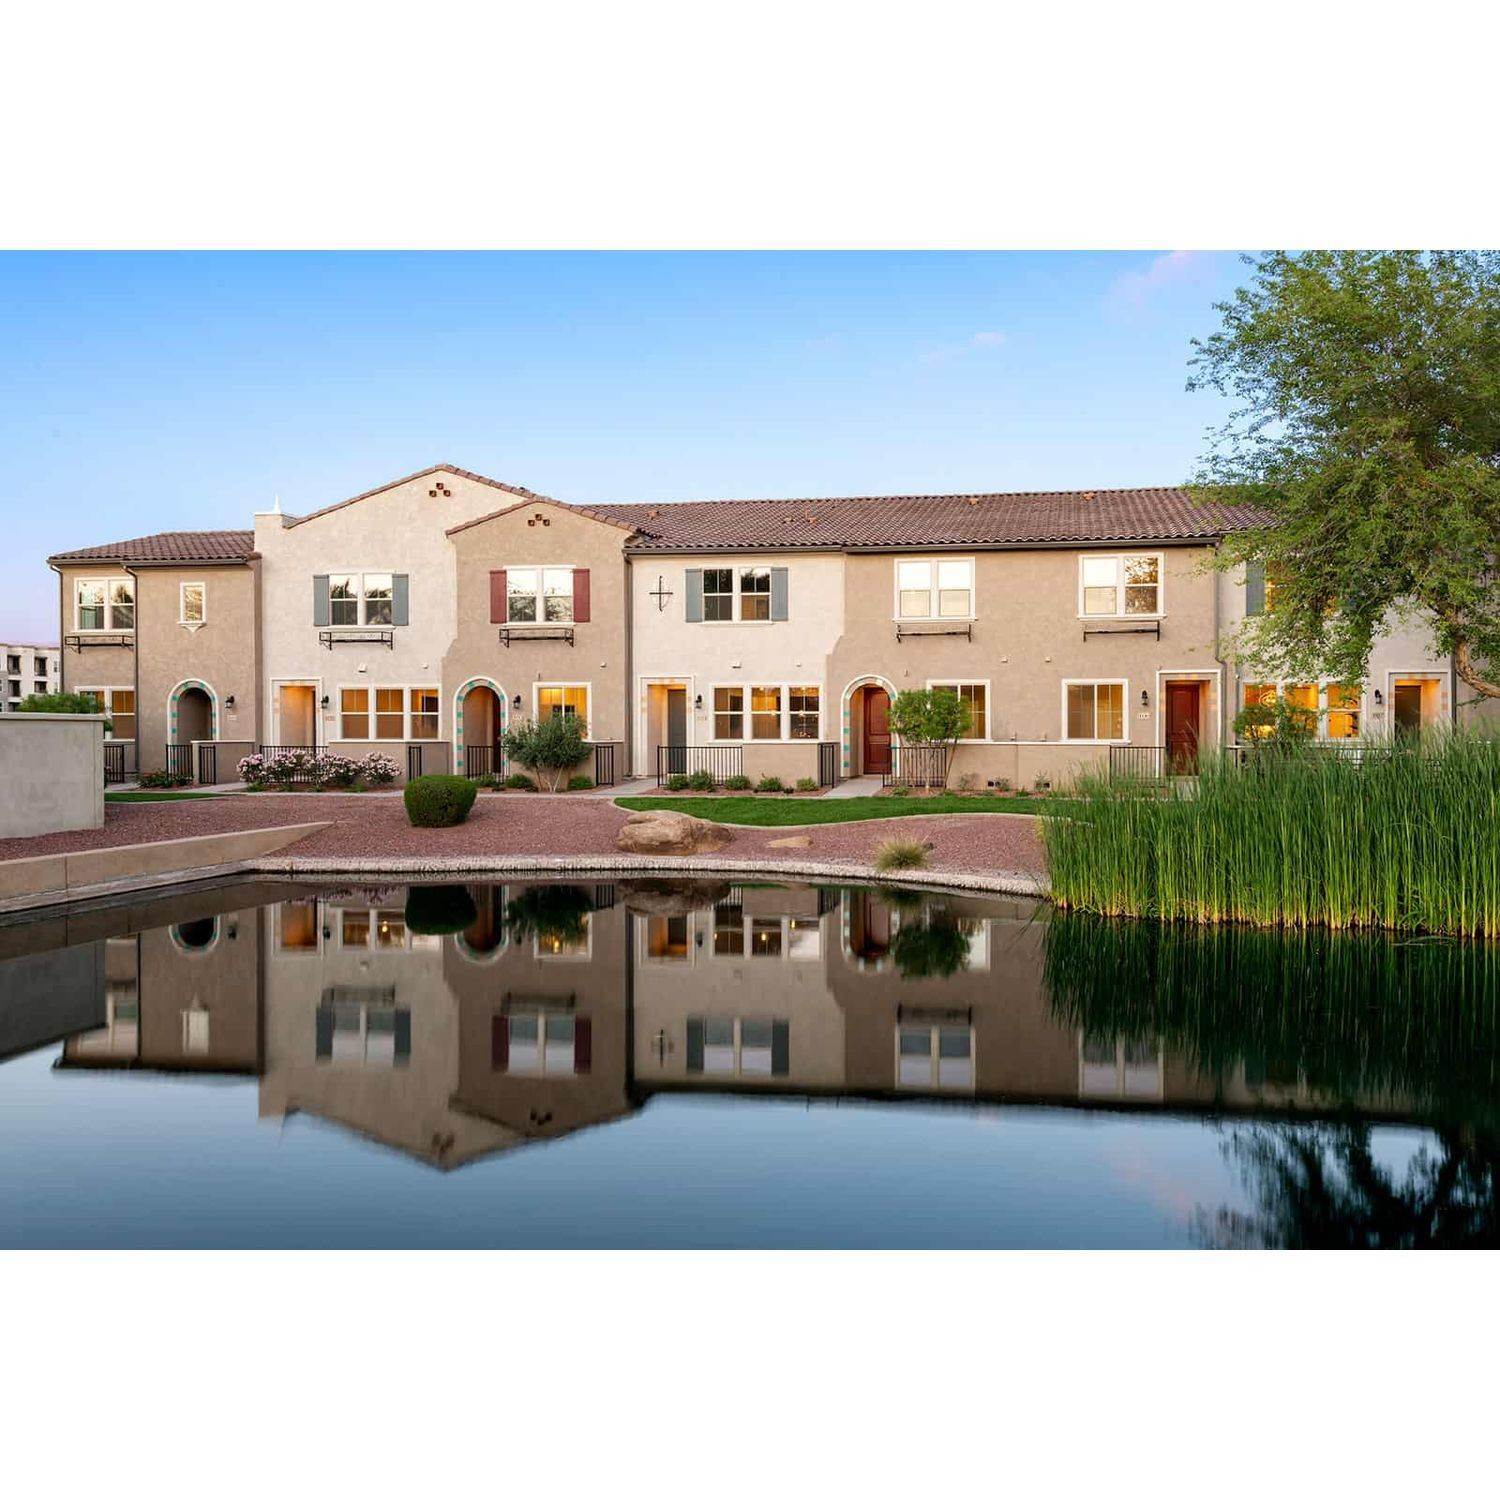 4. The Towns at Annecy建於 2660 S. Equestrian Dr. #110, Gilbert, AZ 85295